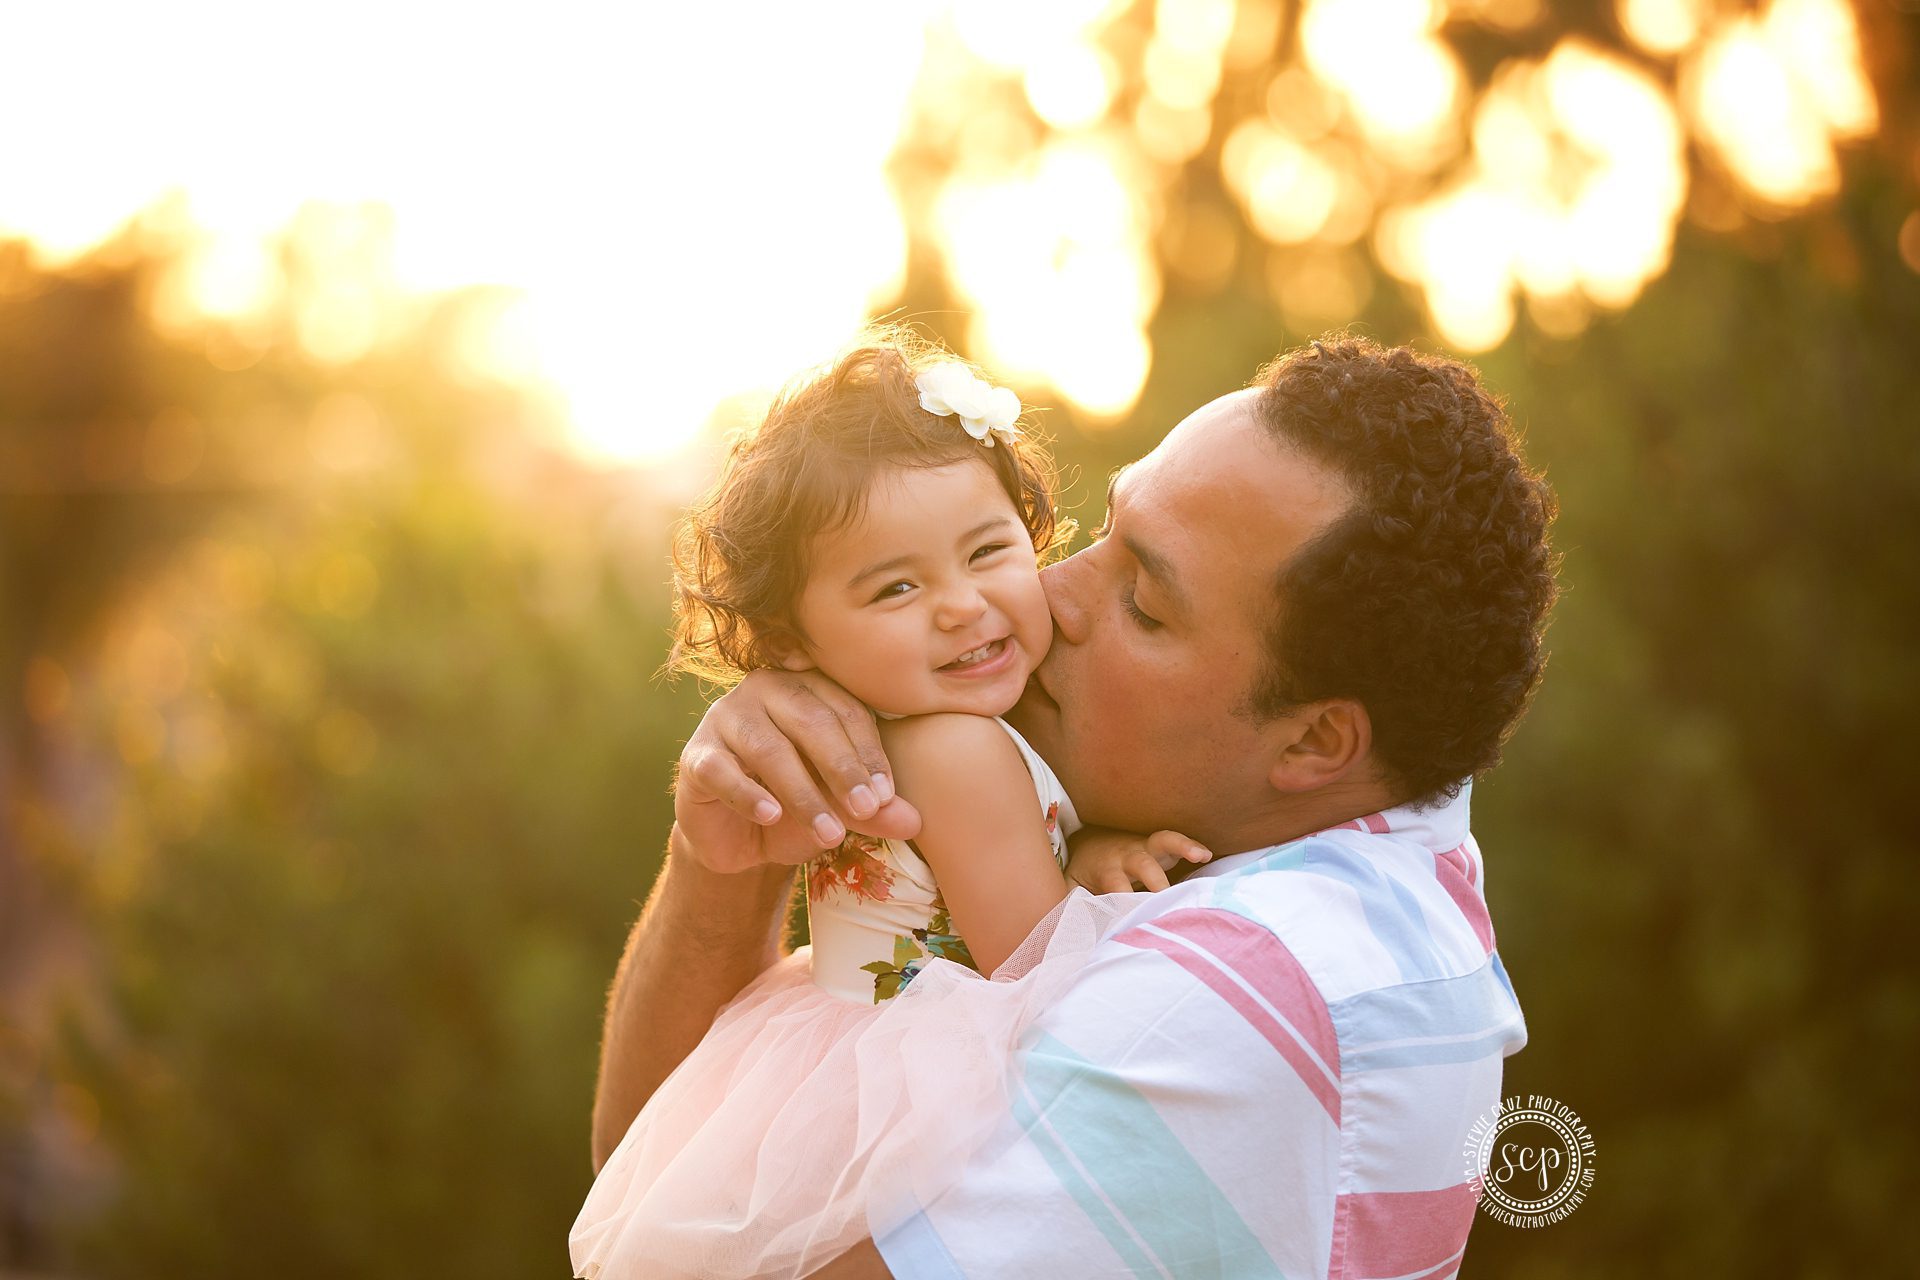 daddy snuggles and kisses are the best. Best Orange County kids photographer captures this cutie